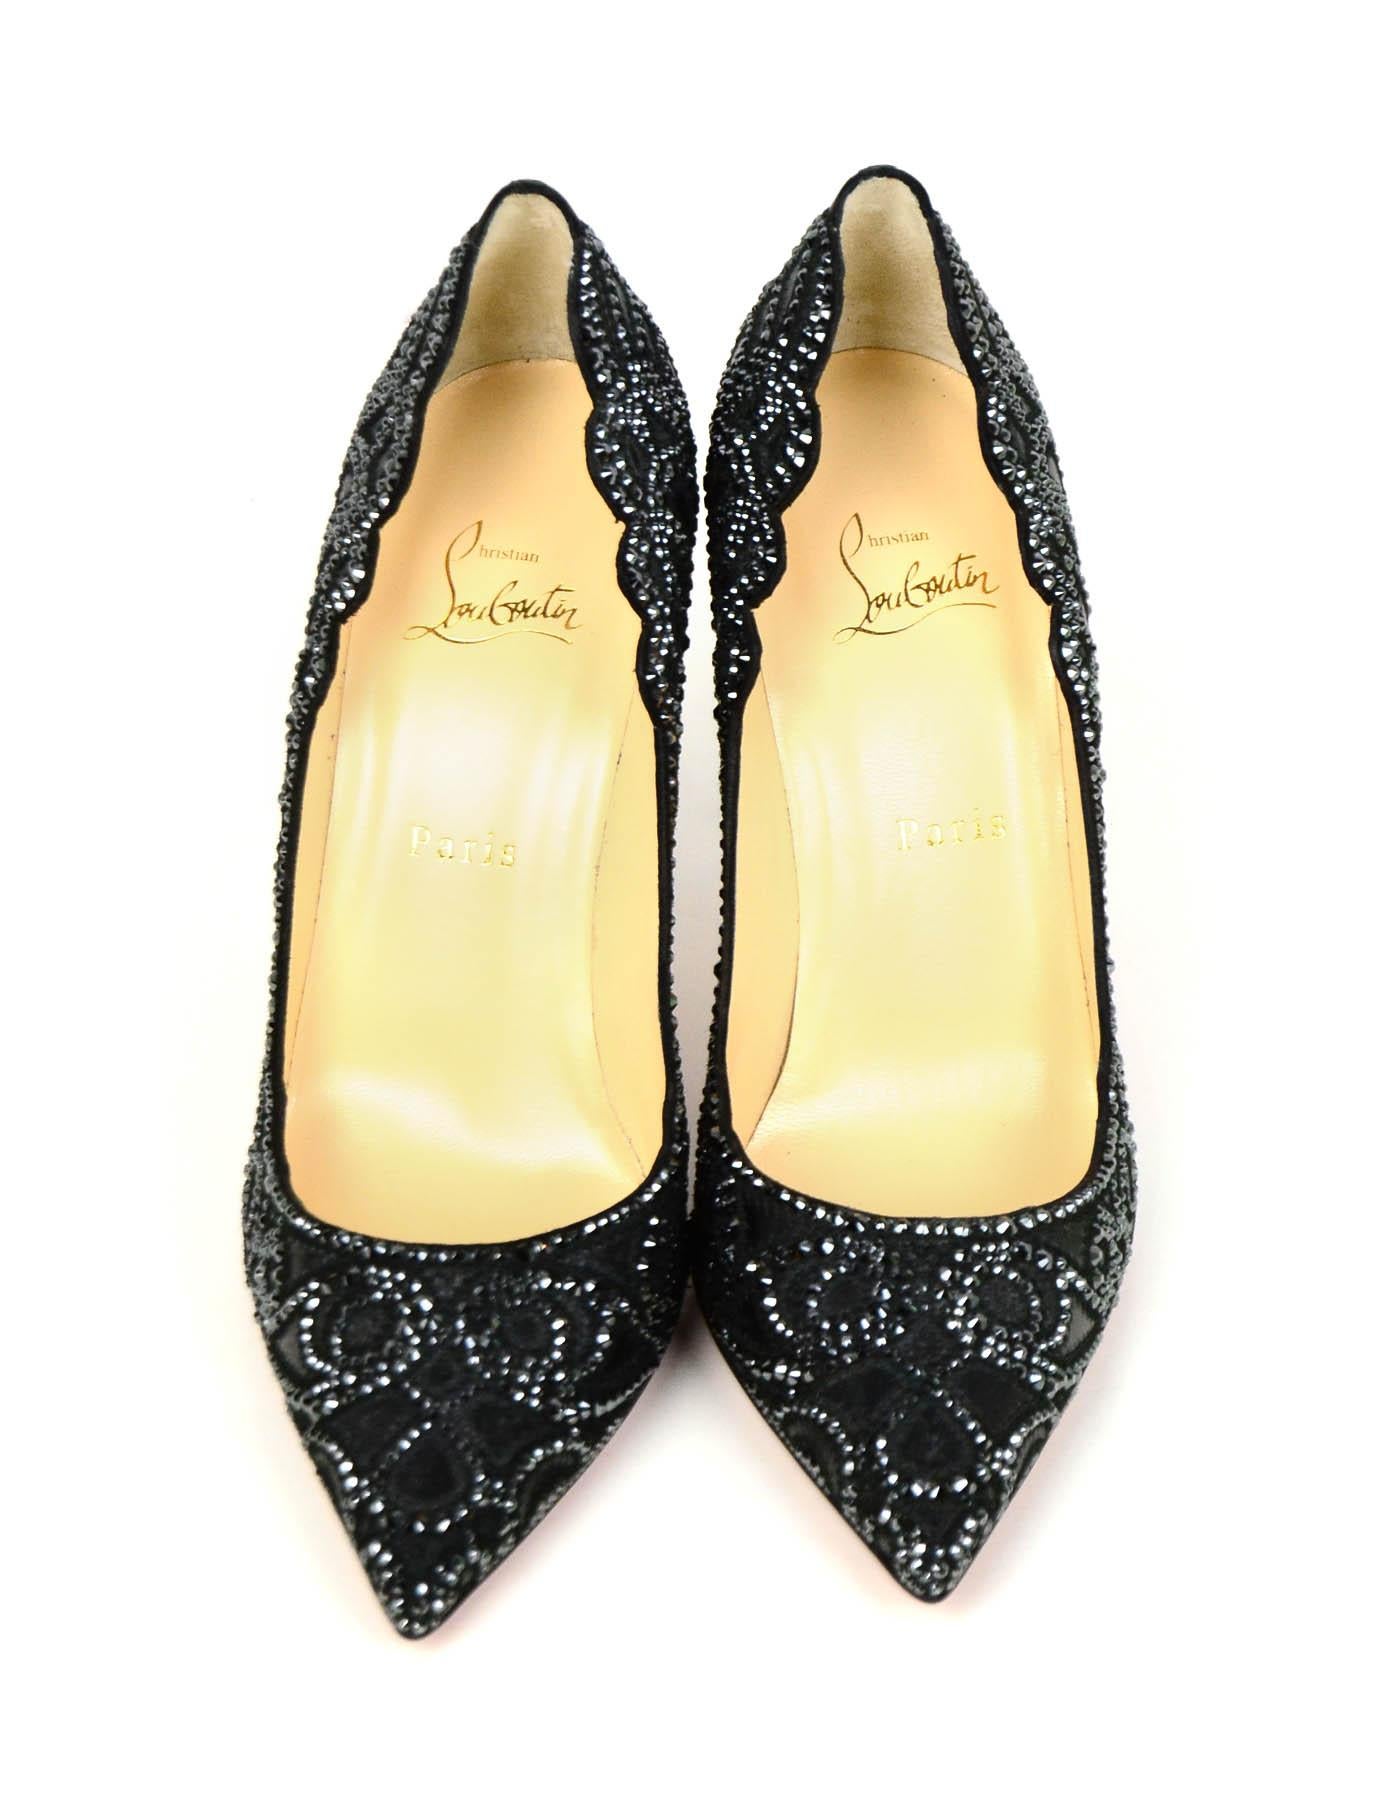 Christian Louboutin Black Calfskin Scalloped Crystal Top Vague Pumps sz 39.5

Made In: Italy
Color: Black
Hardware: N/A
Materials: Calfskin, crystals
Closure/Opening: Slide on
Overall Condition: New, never worn
Estimated Retail: $2,995
Includes: